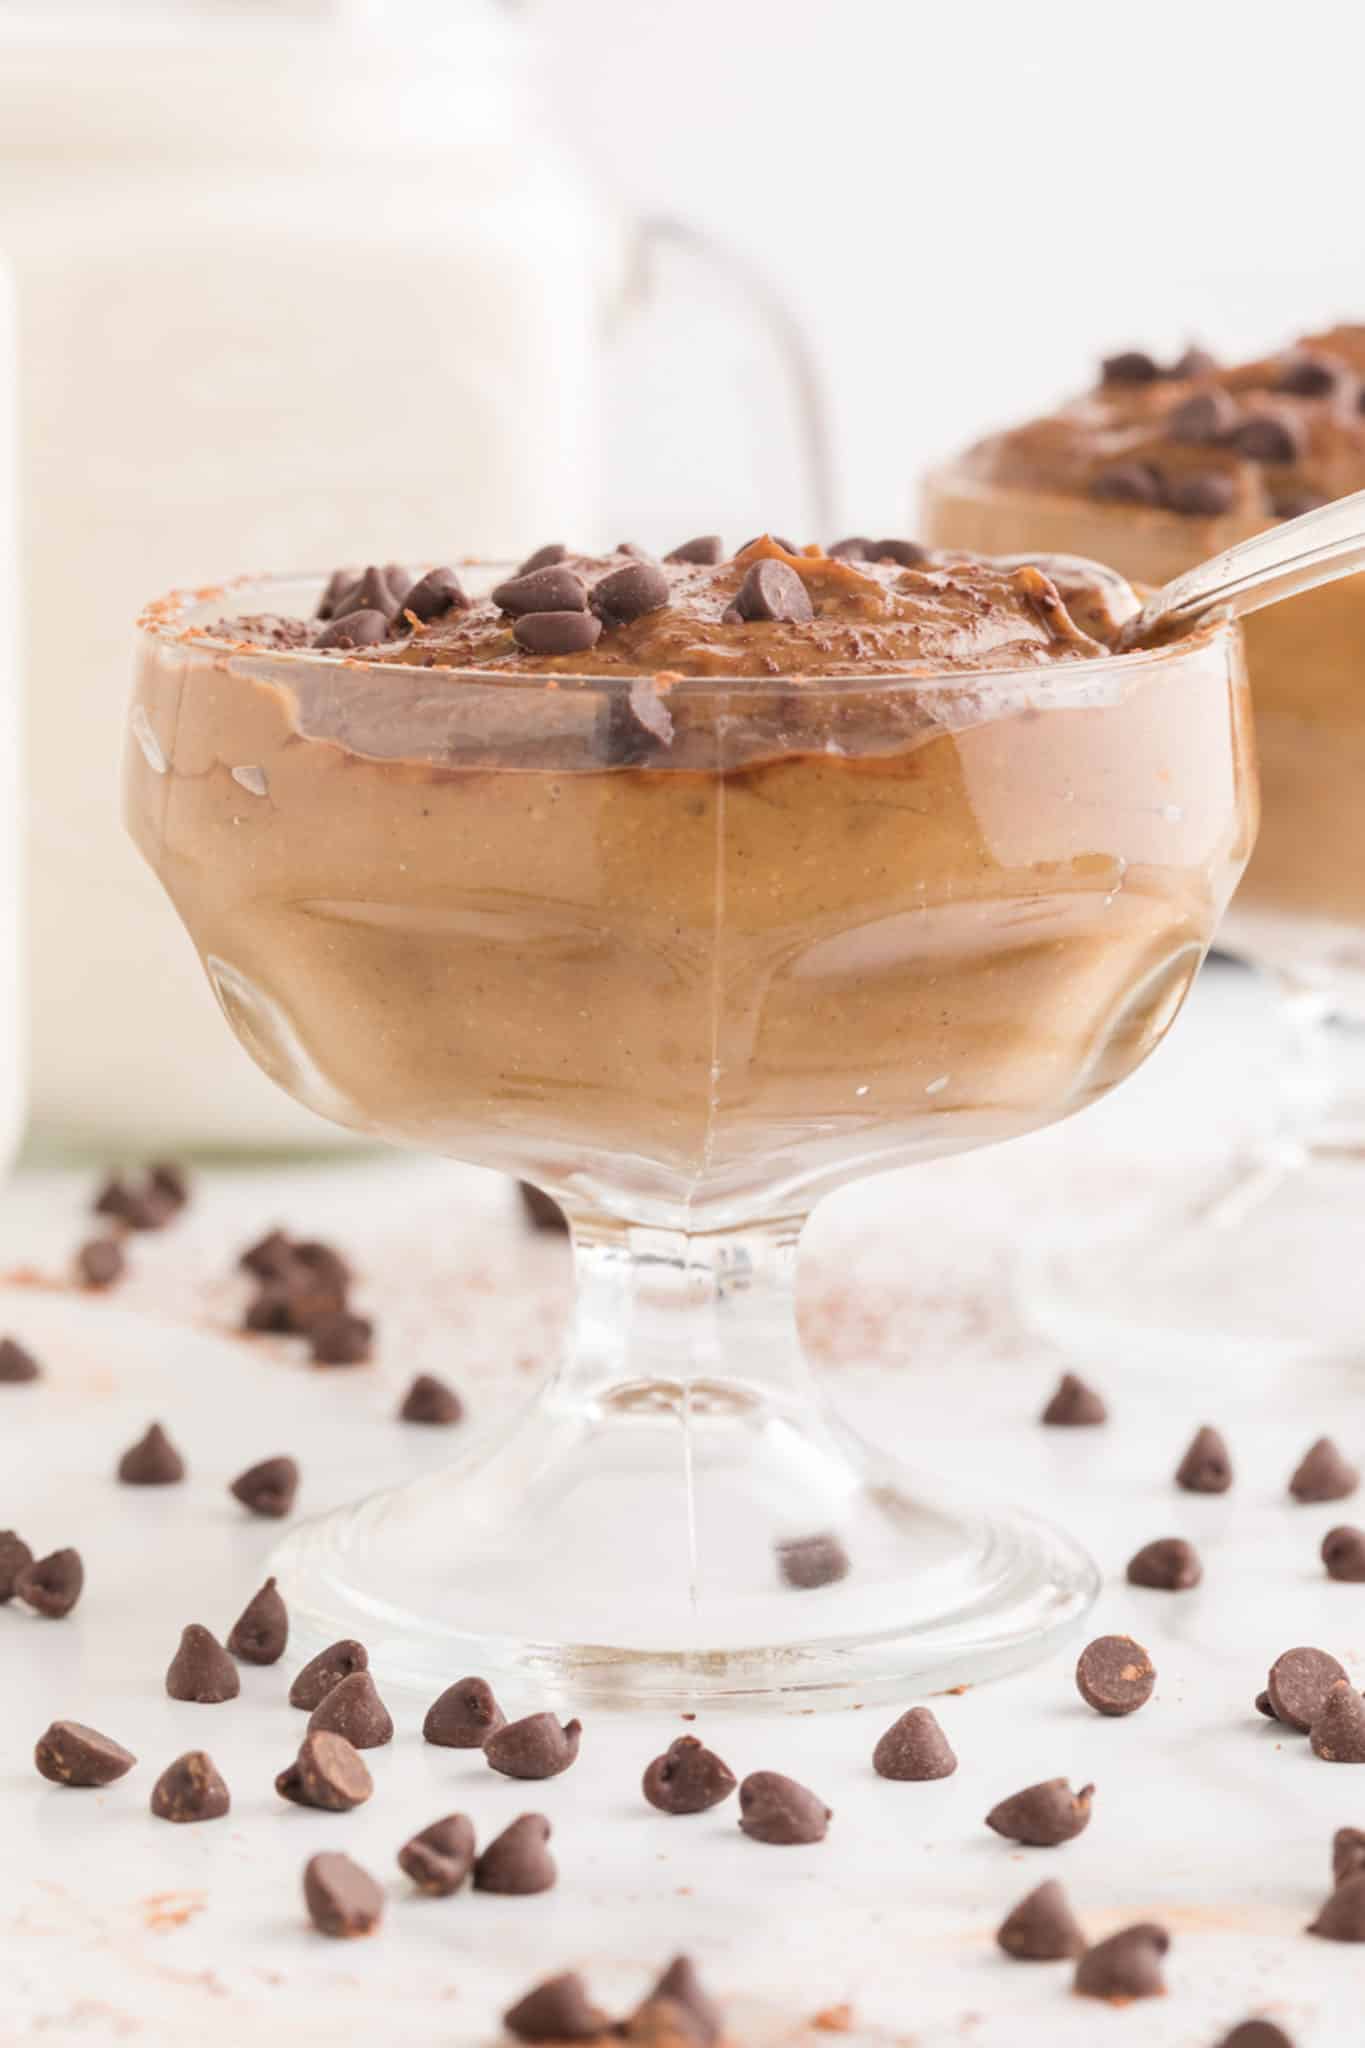 Large parfait cup of chocolate avocado pudding topped with chocolate chips.